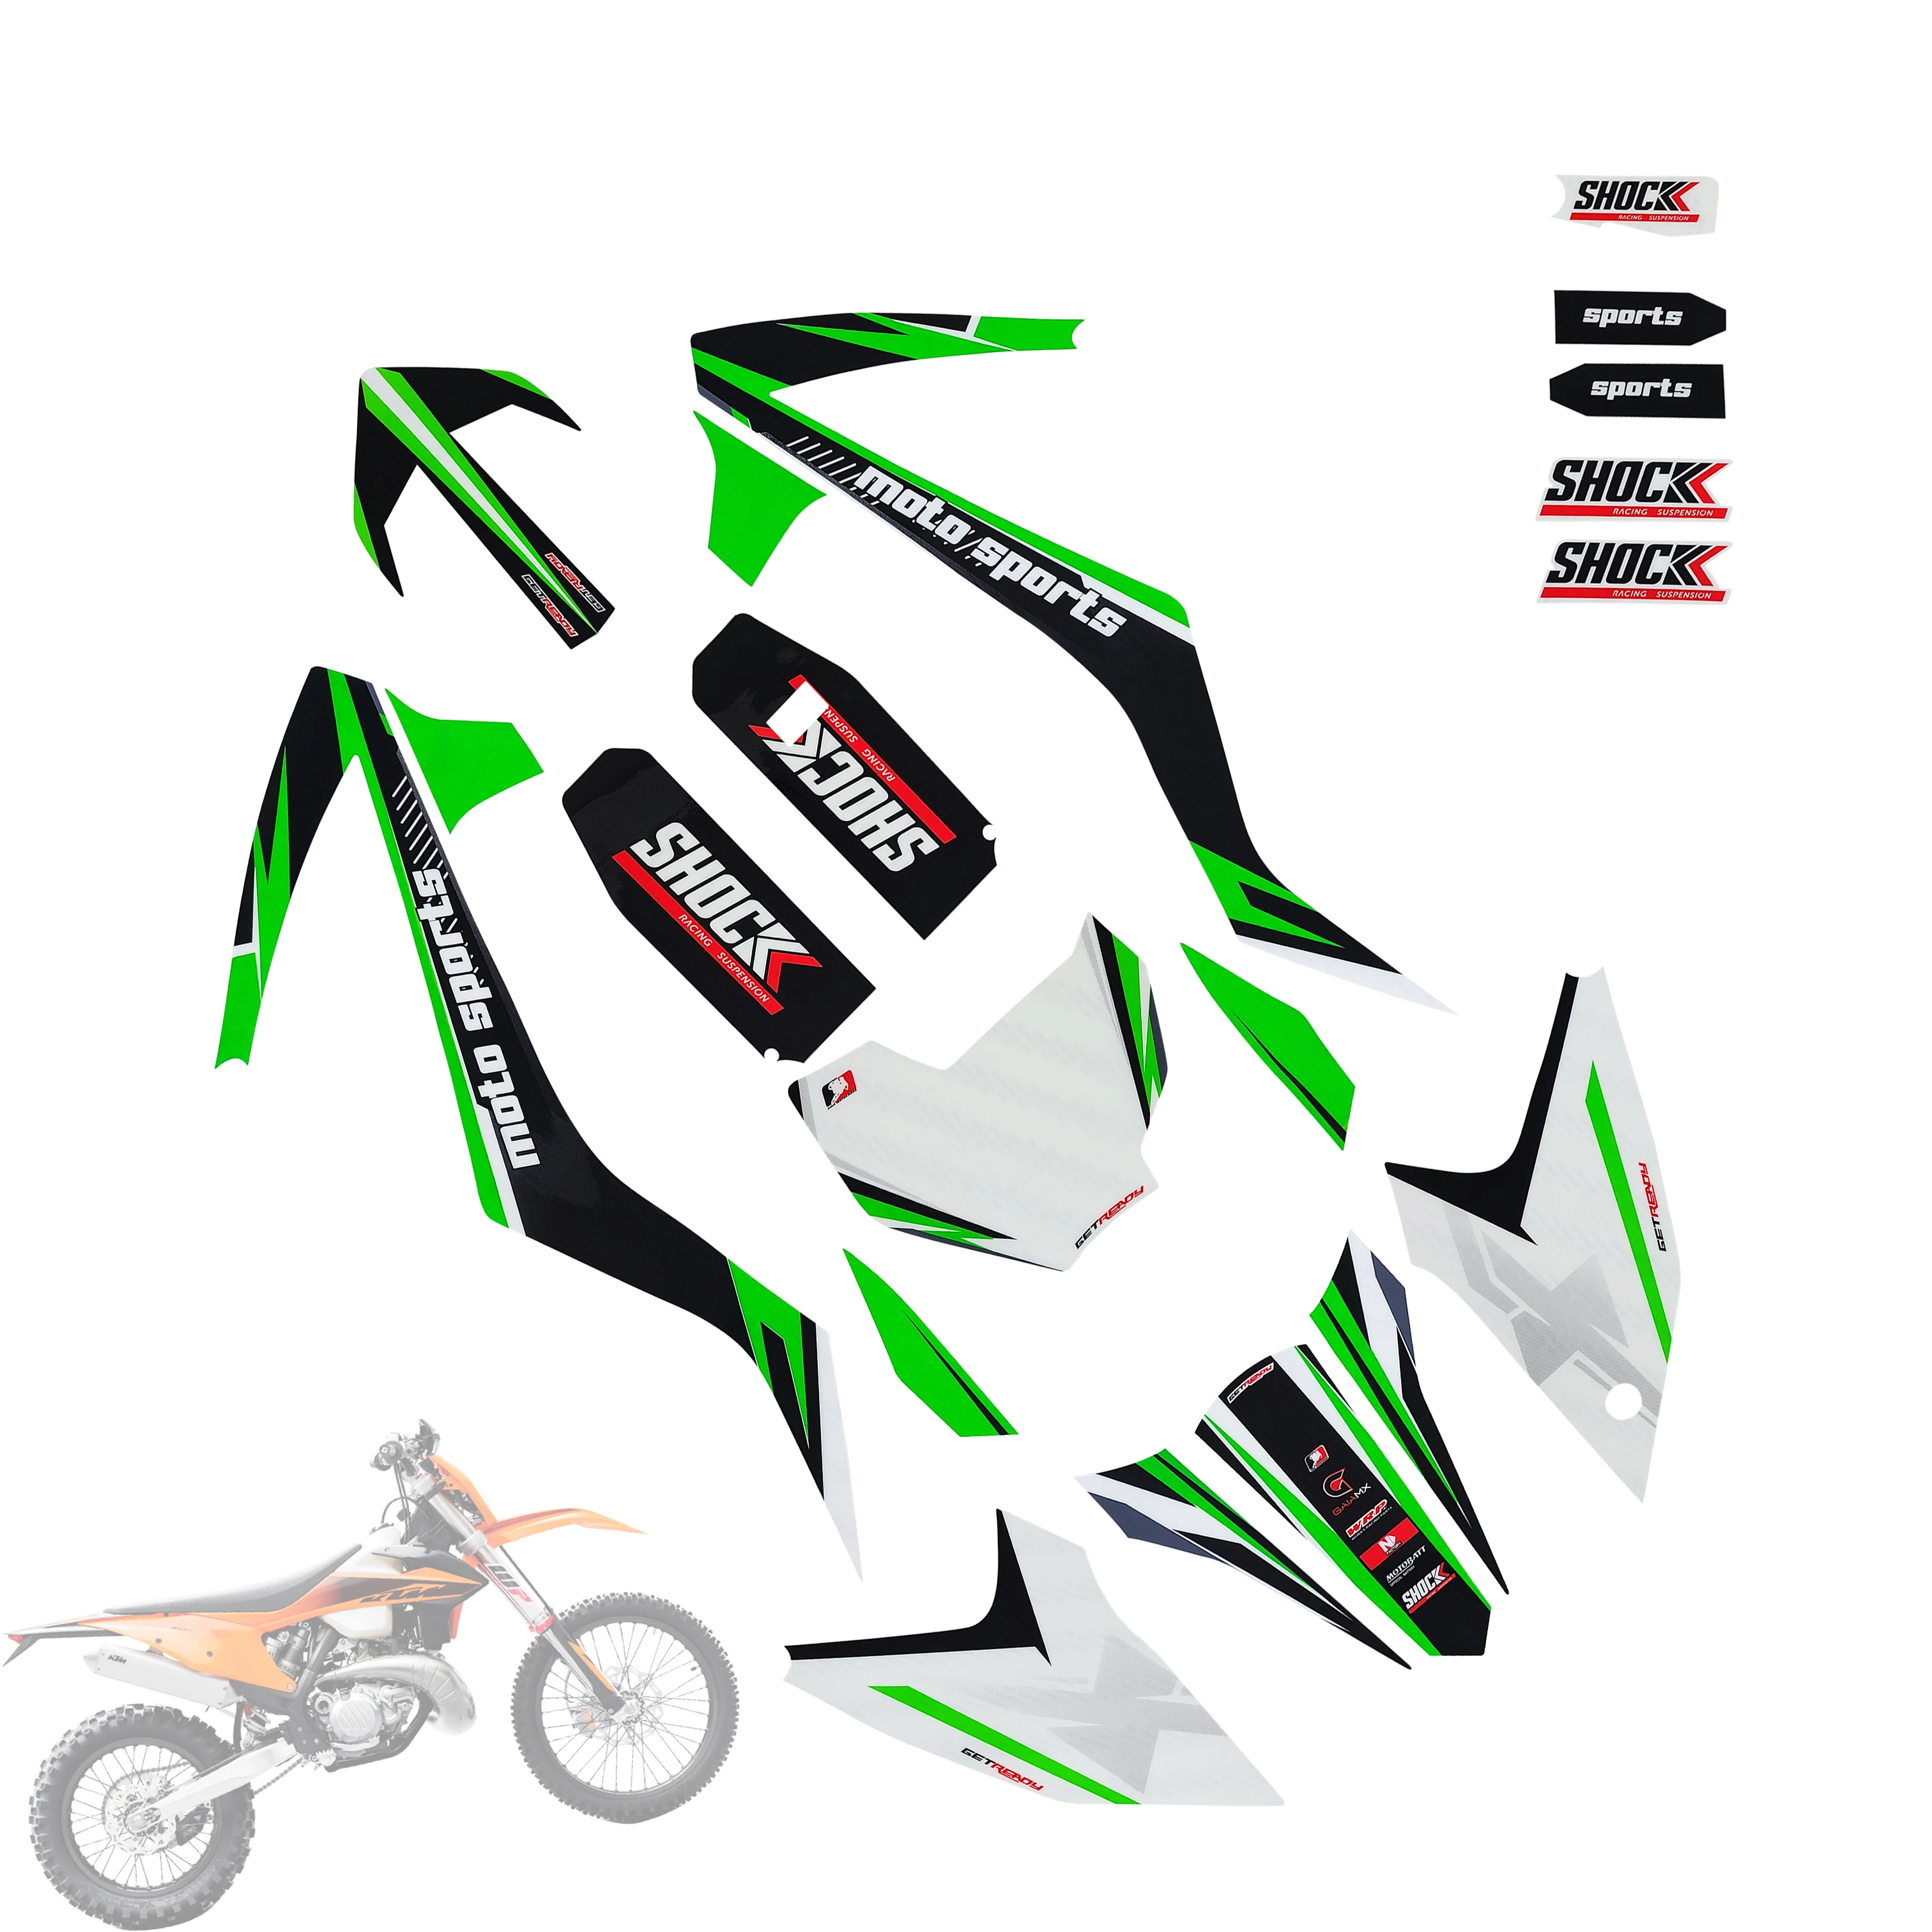 LING QI 3M Graphics Sticker Backgrounds Decal For KT 65 , DB20 Model Dirt Bike.Decals 3M Motorcycle Stickers